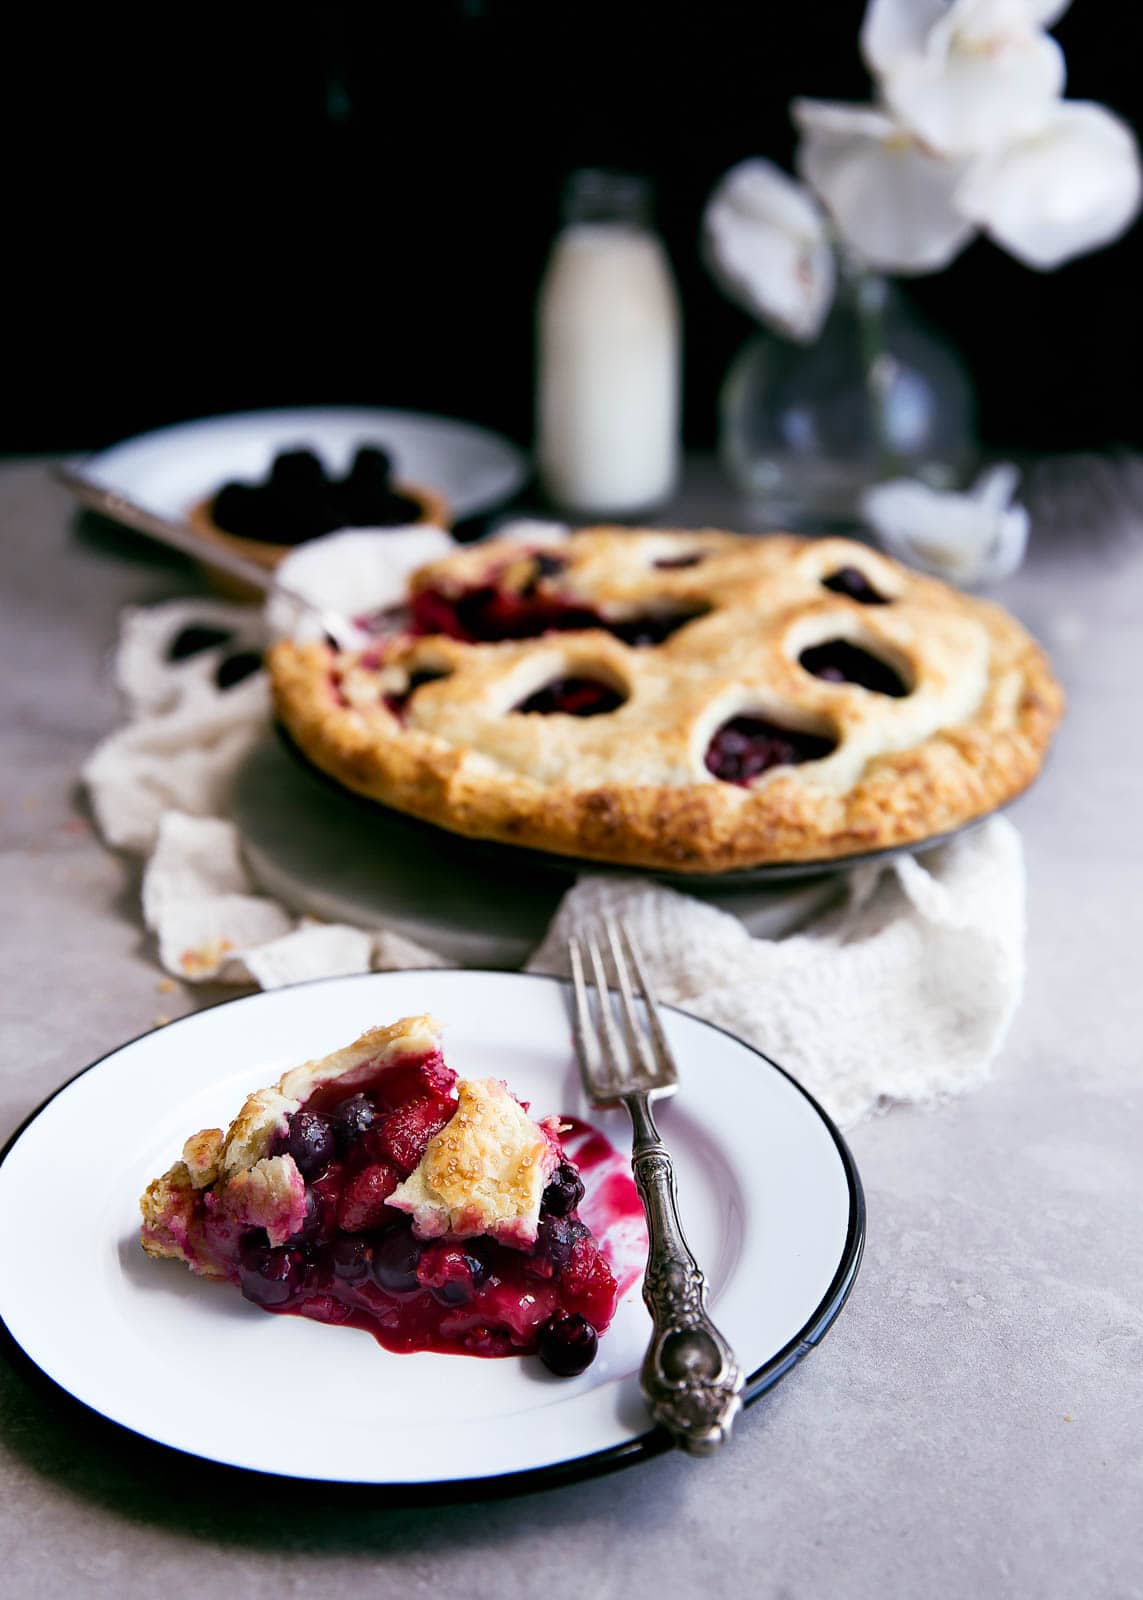 The prettiest pie there ever was: this quadruple berry bumbleberry pie.